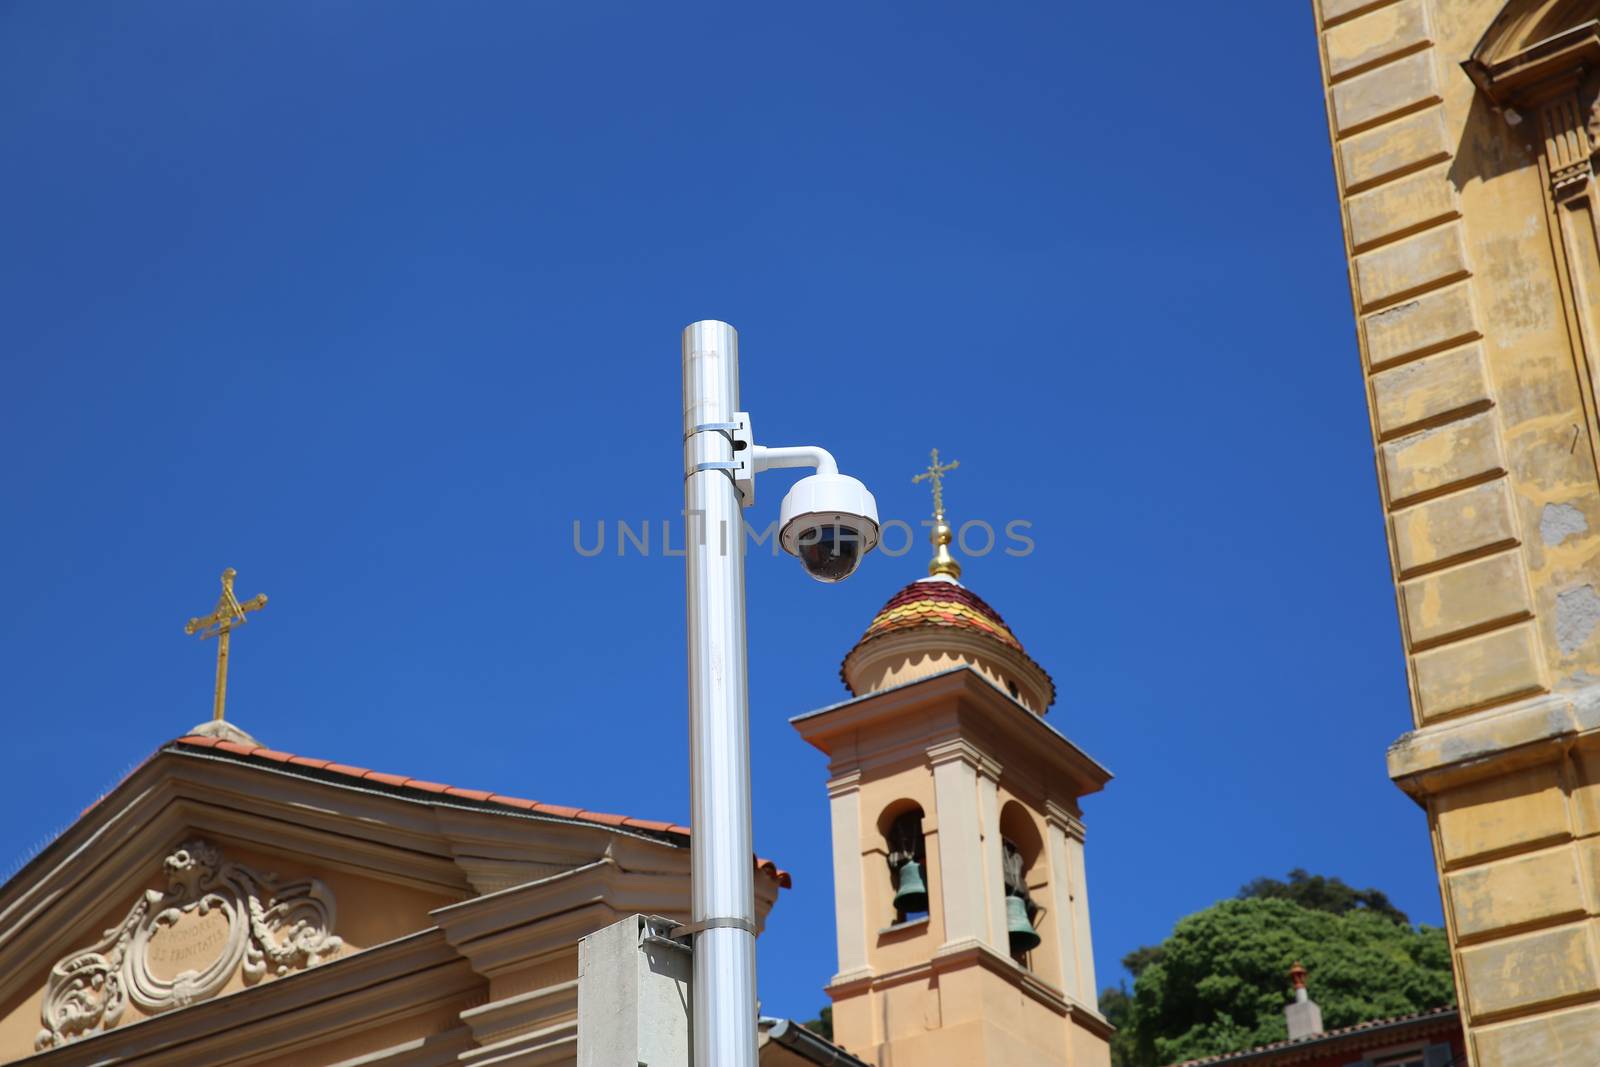 Dome Type Outdoor CCTV Camera on Street Lamp in Nice, Architecture of a Church in the Background